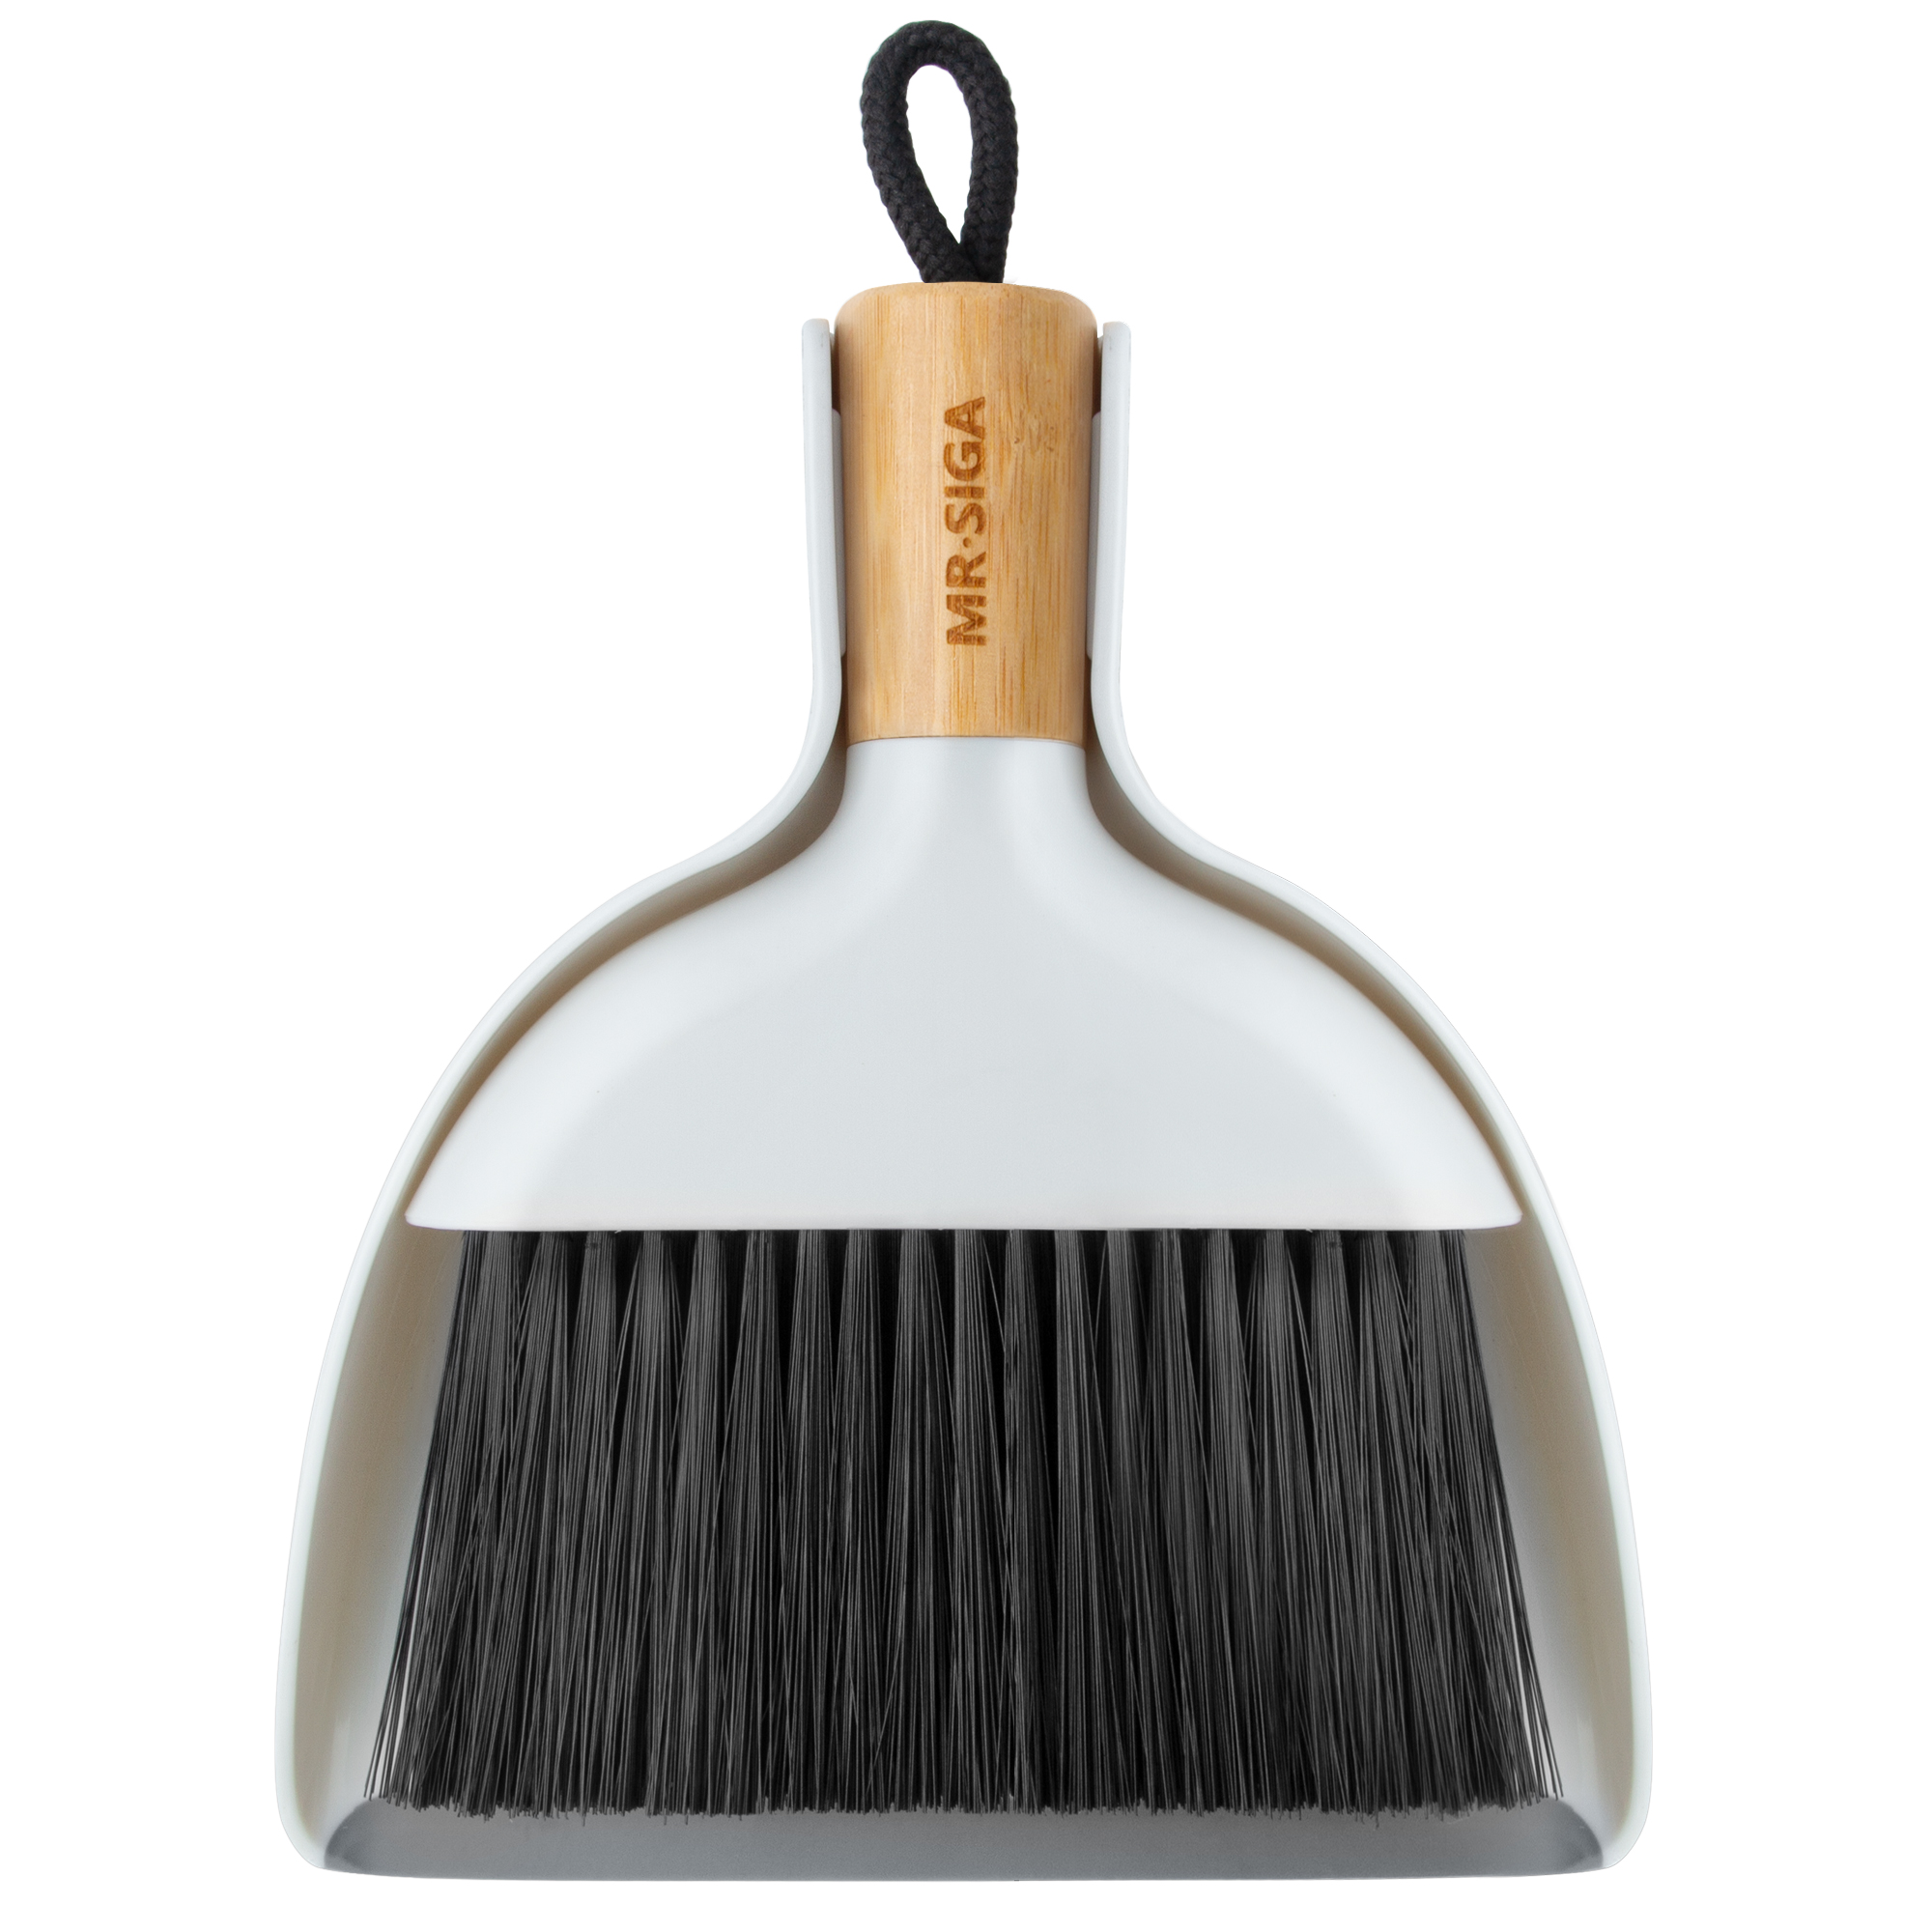 MR.Siga Mini Dustpan and Brush Set, Cleaning Brush and Dustpan Combo with Bamboo Handle - image 1 of 7